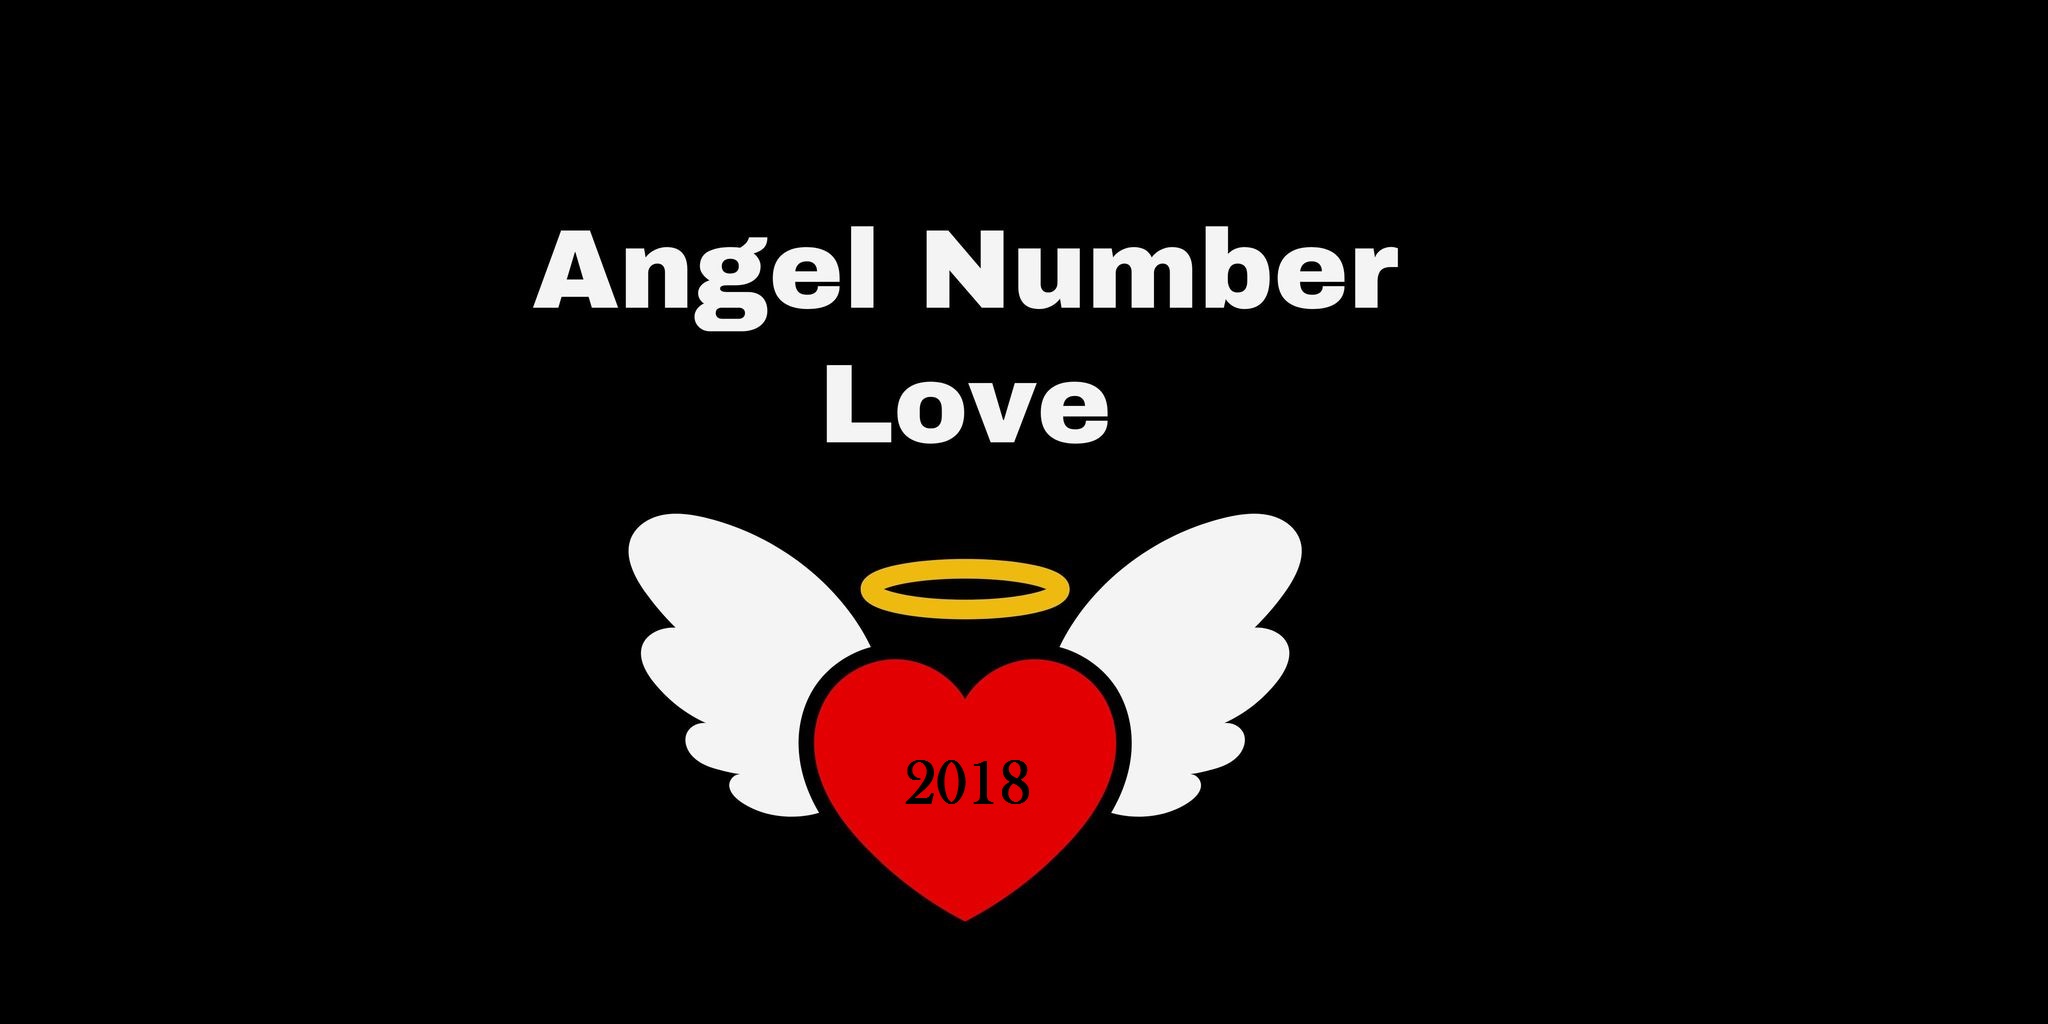 2018 Angel Number Meaning In Love